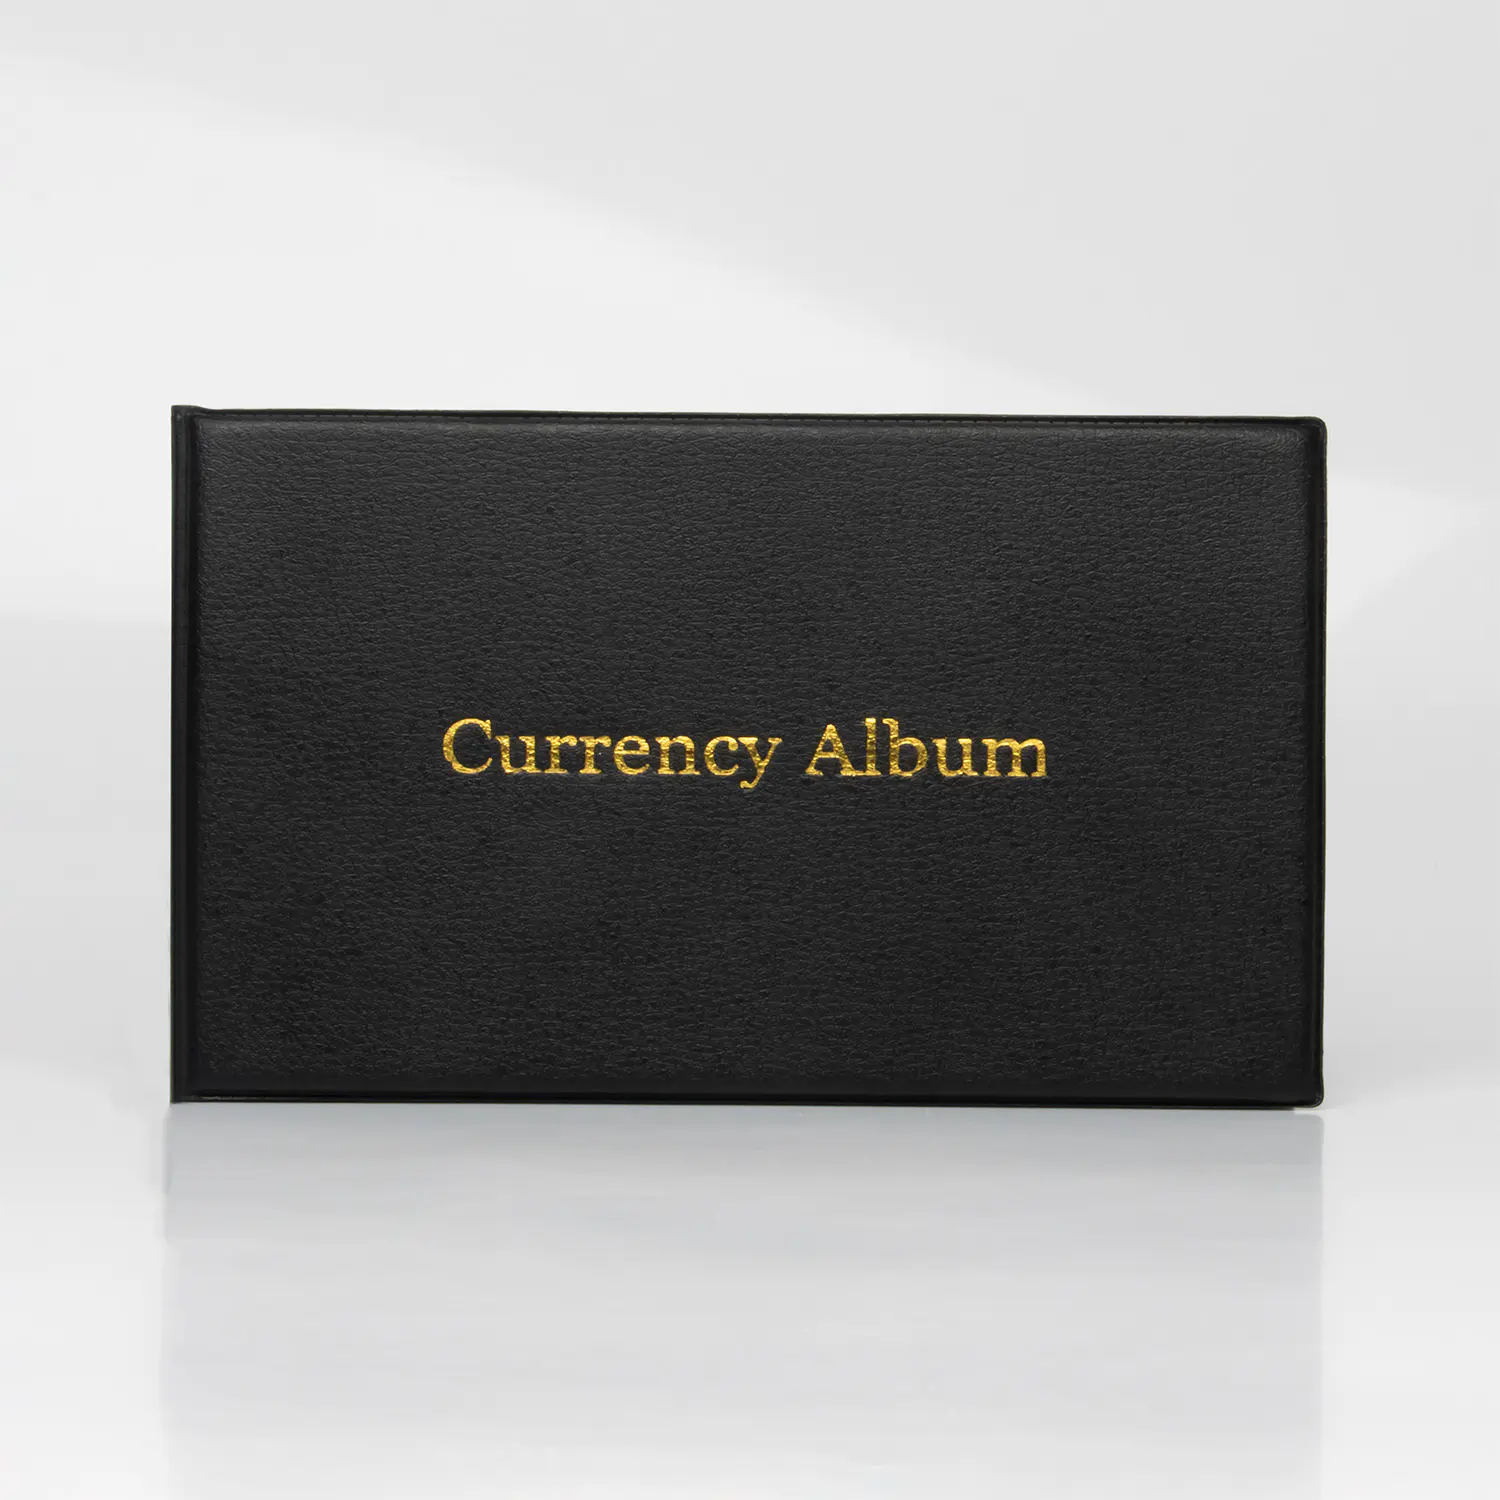 Pocket album for bank notes and other documents-Black